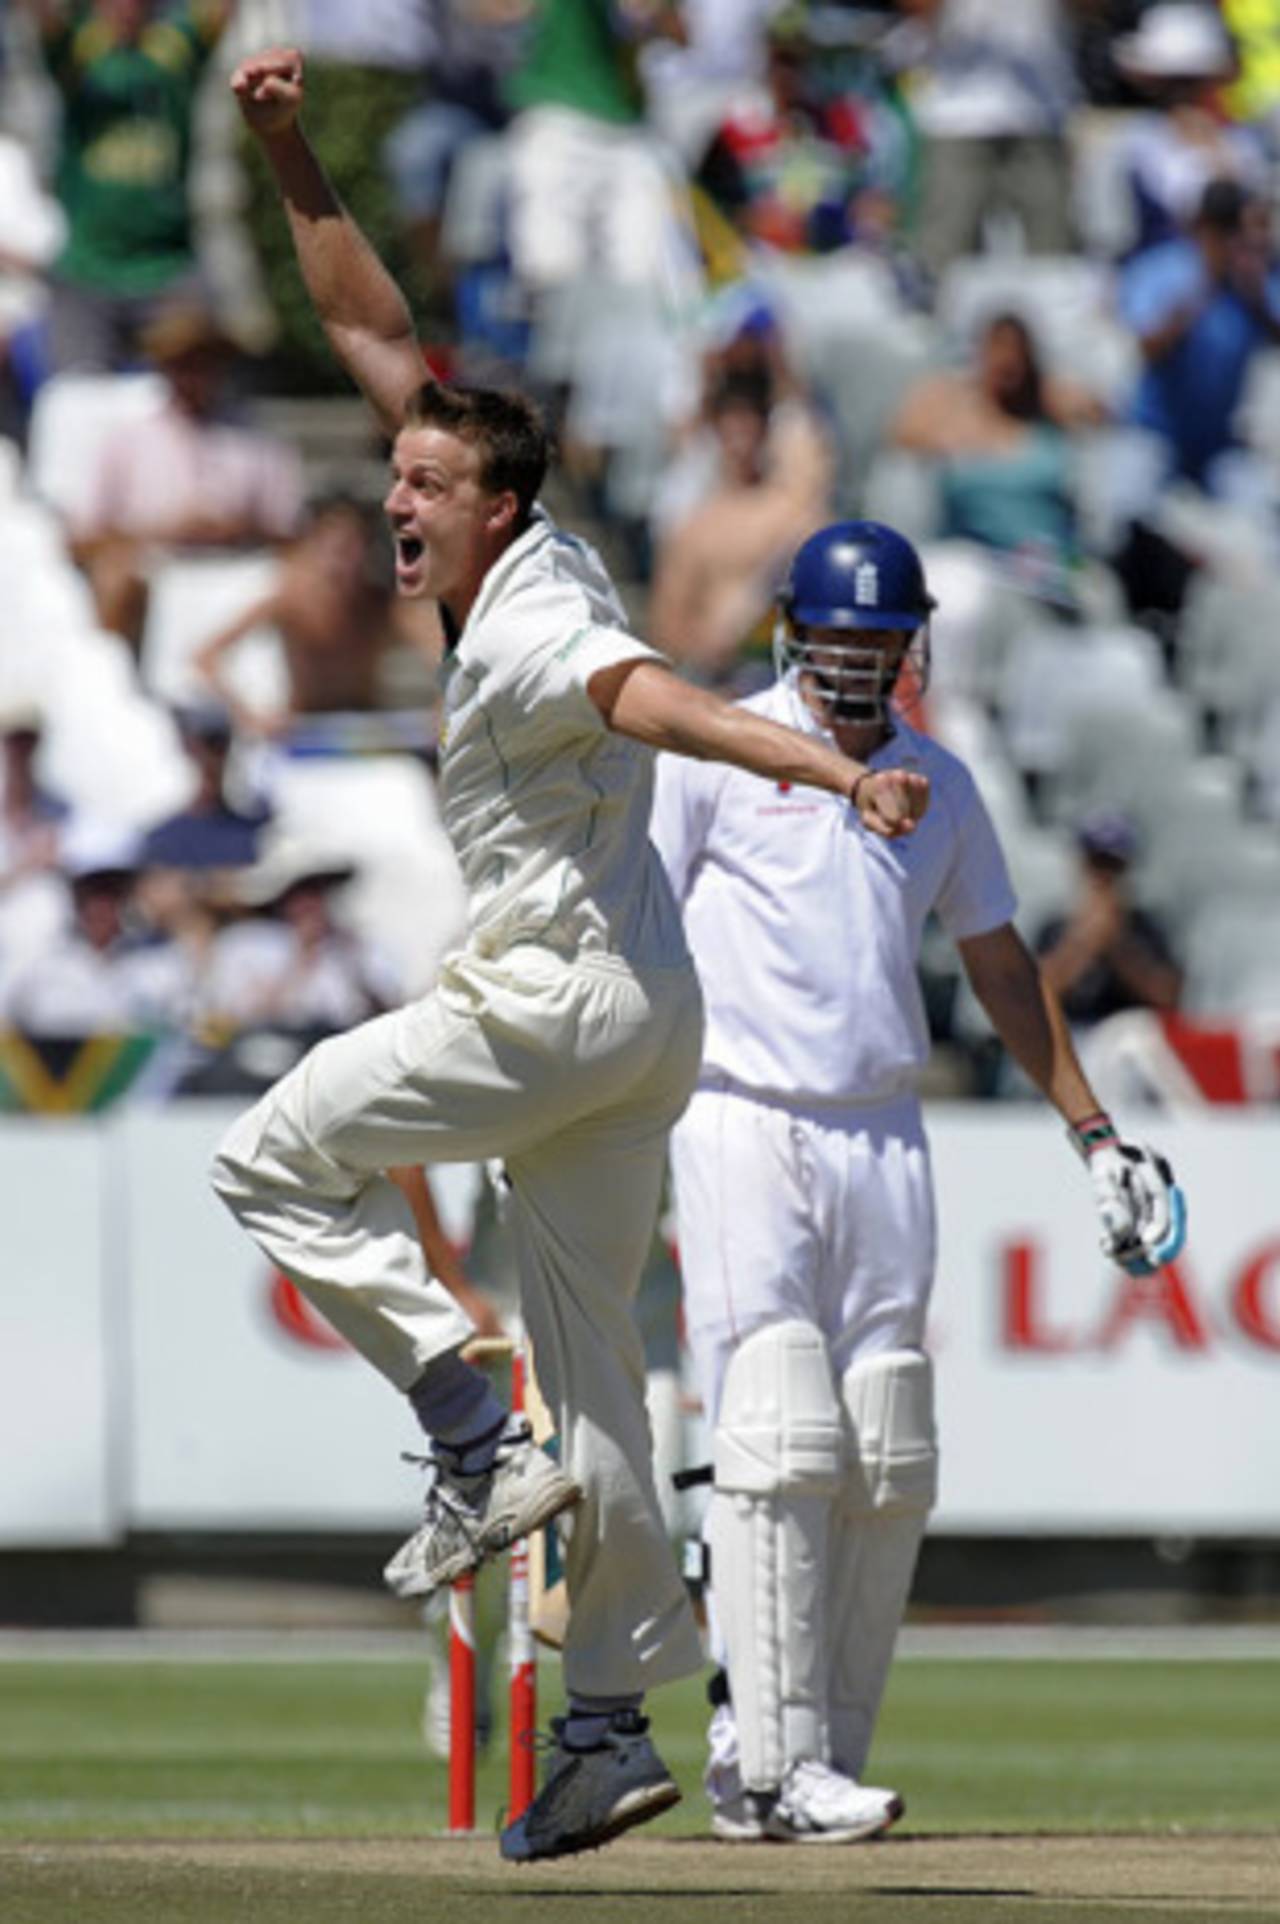 Morne Morkel collected two wickets in the first over of the third day's play when he removed James Anderson for a duck, South Africa v England, 3rd Test, Cape Town, January 5, 2010